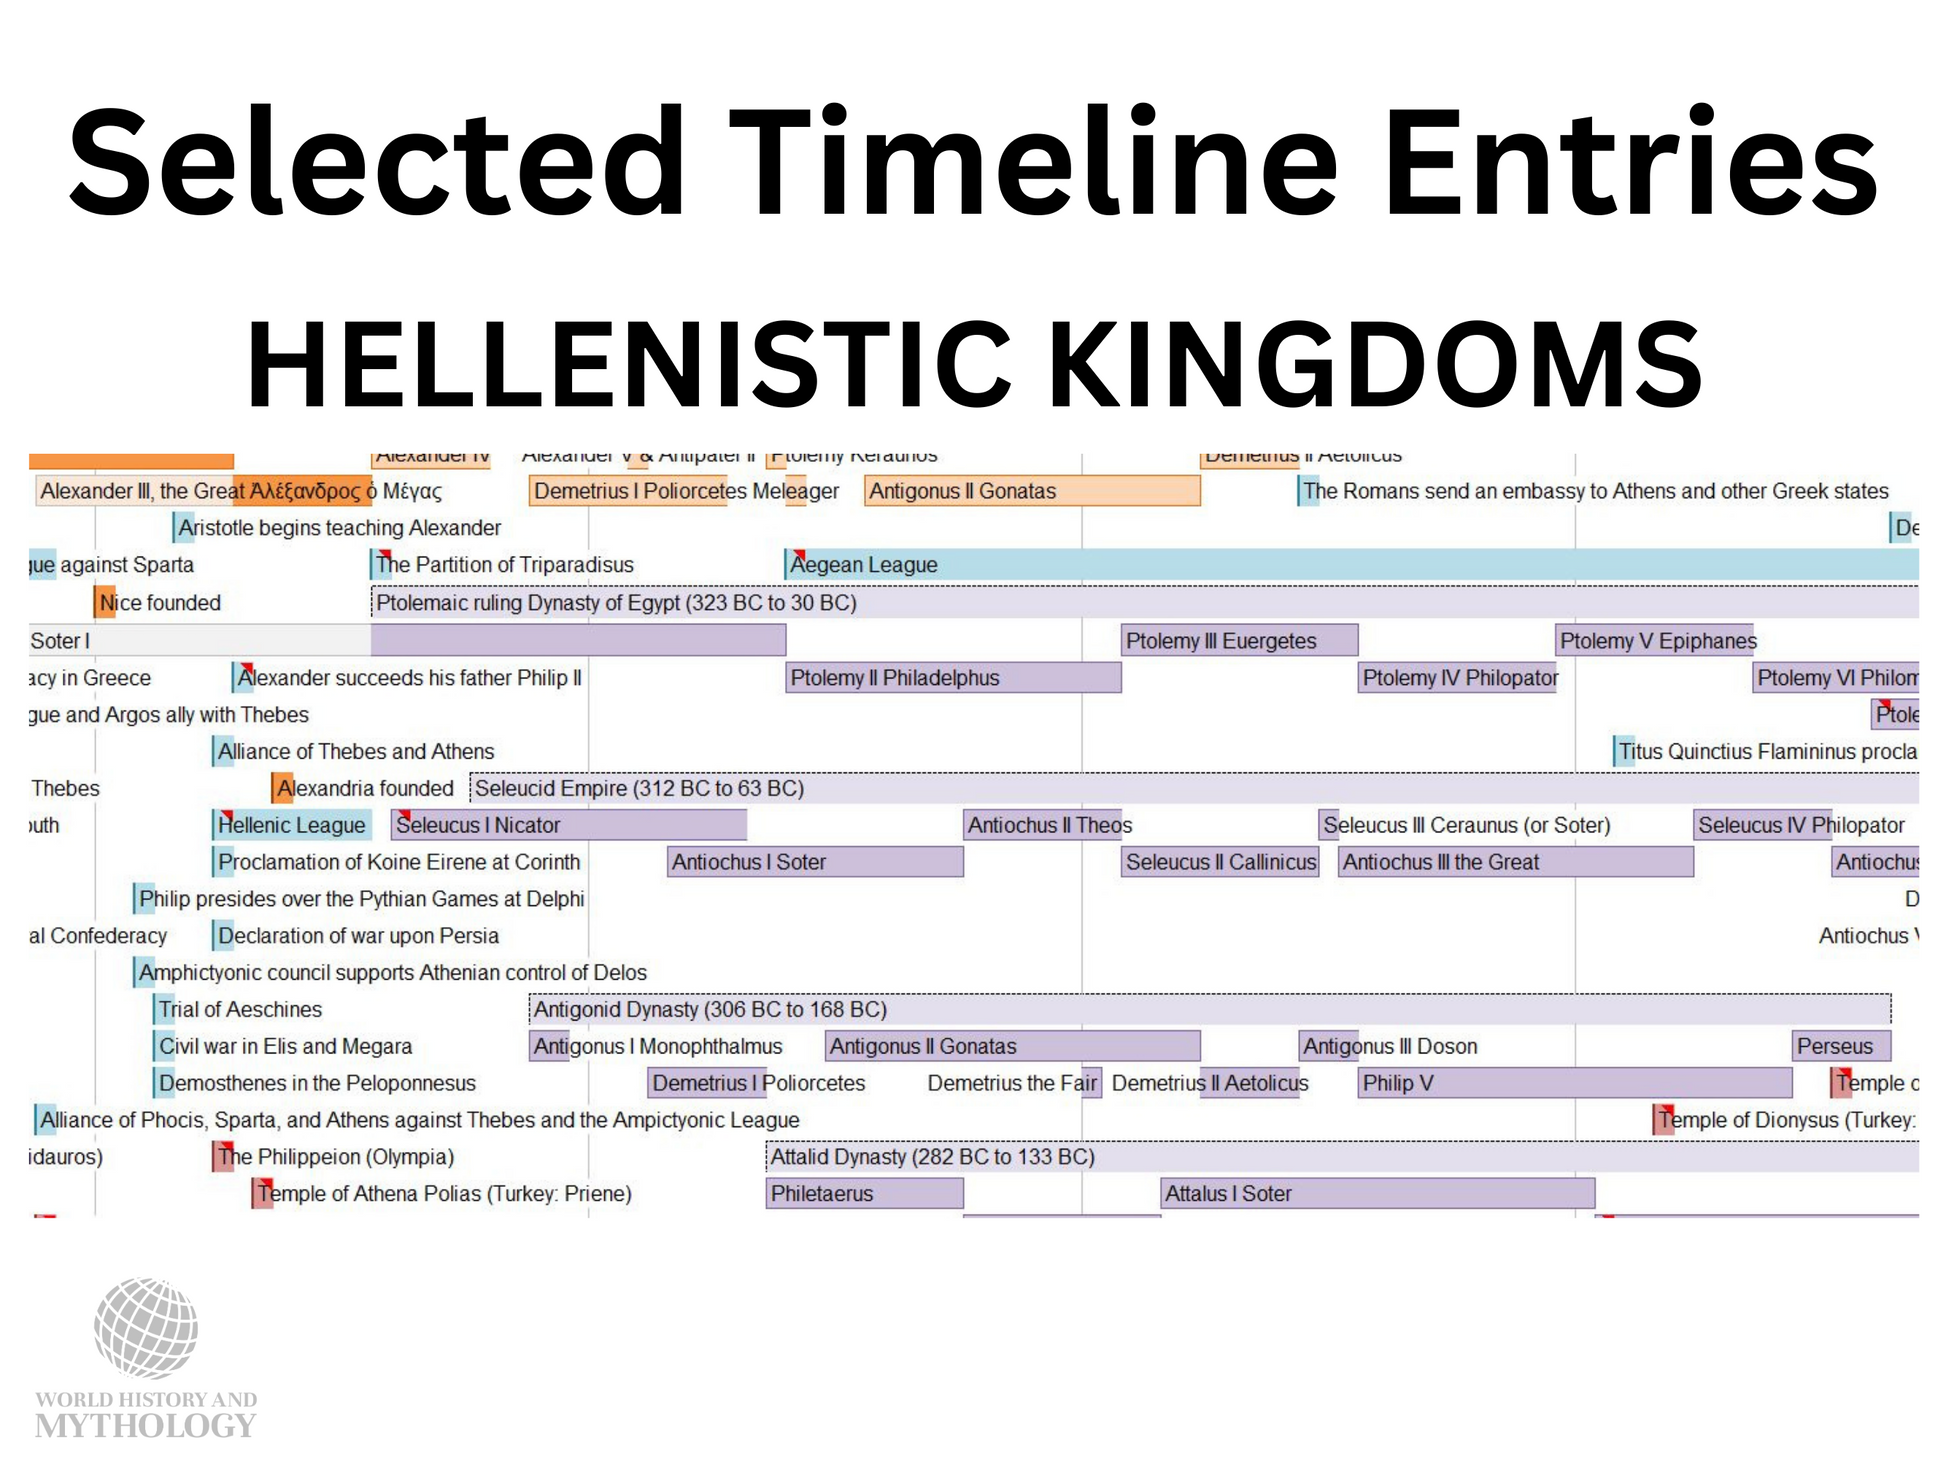 Example of a section of the Timeline of Ancient Greece and Rome showing the Hellenistic Kingdoms.